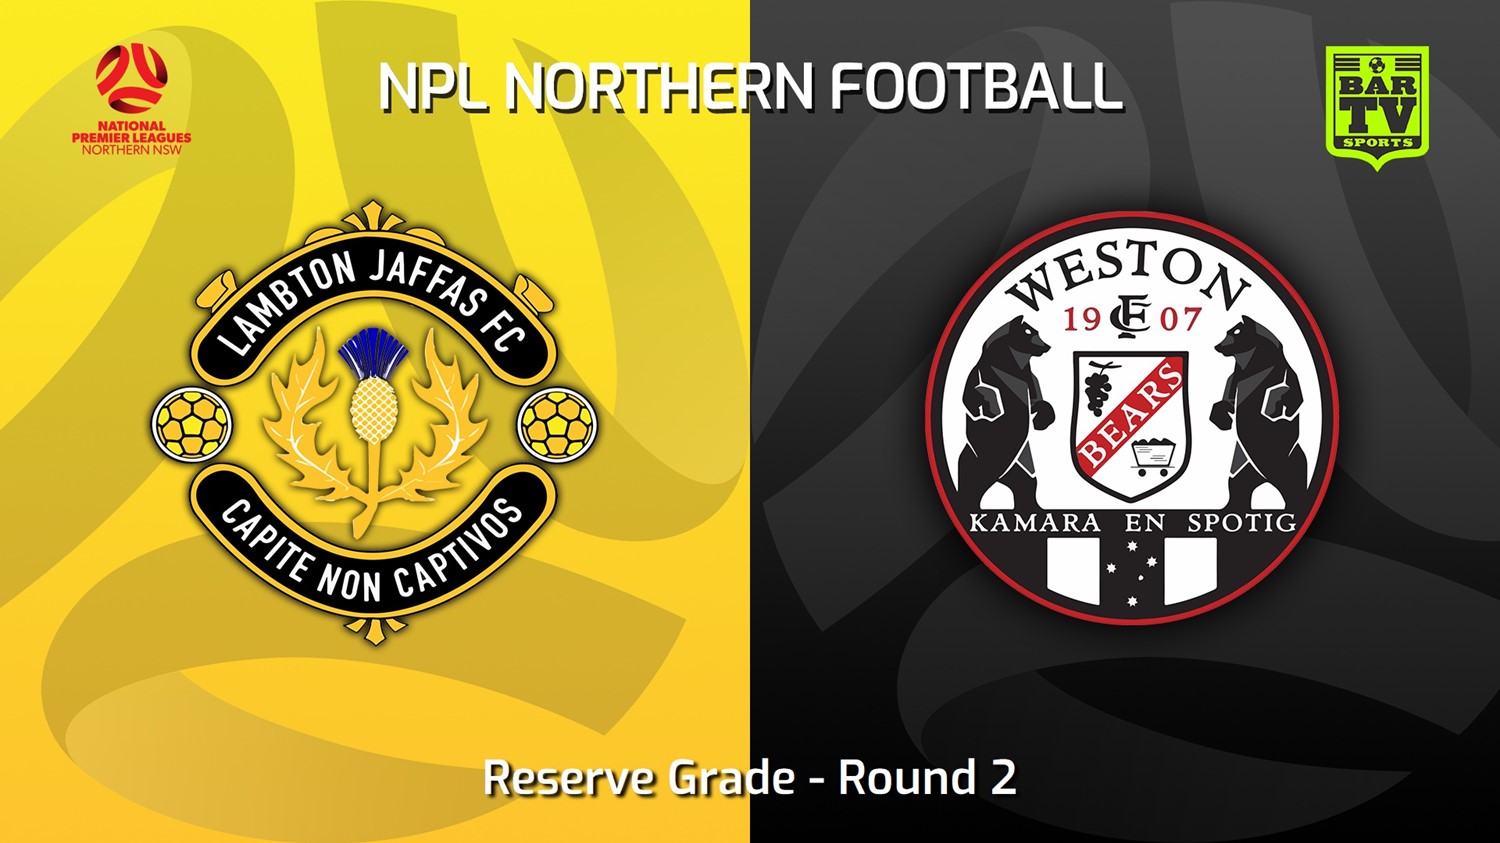 230311-NNSW NPLM Res Round 2 - Lambton Jaffas FC Res v Weston Workers FC Res Minigame Slate Image